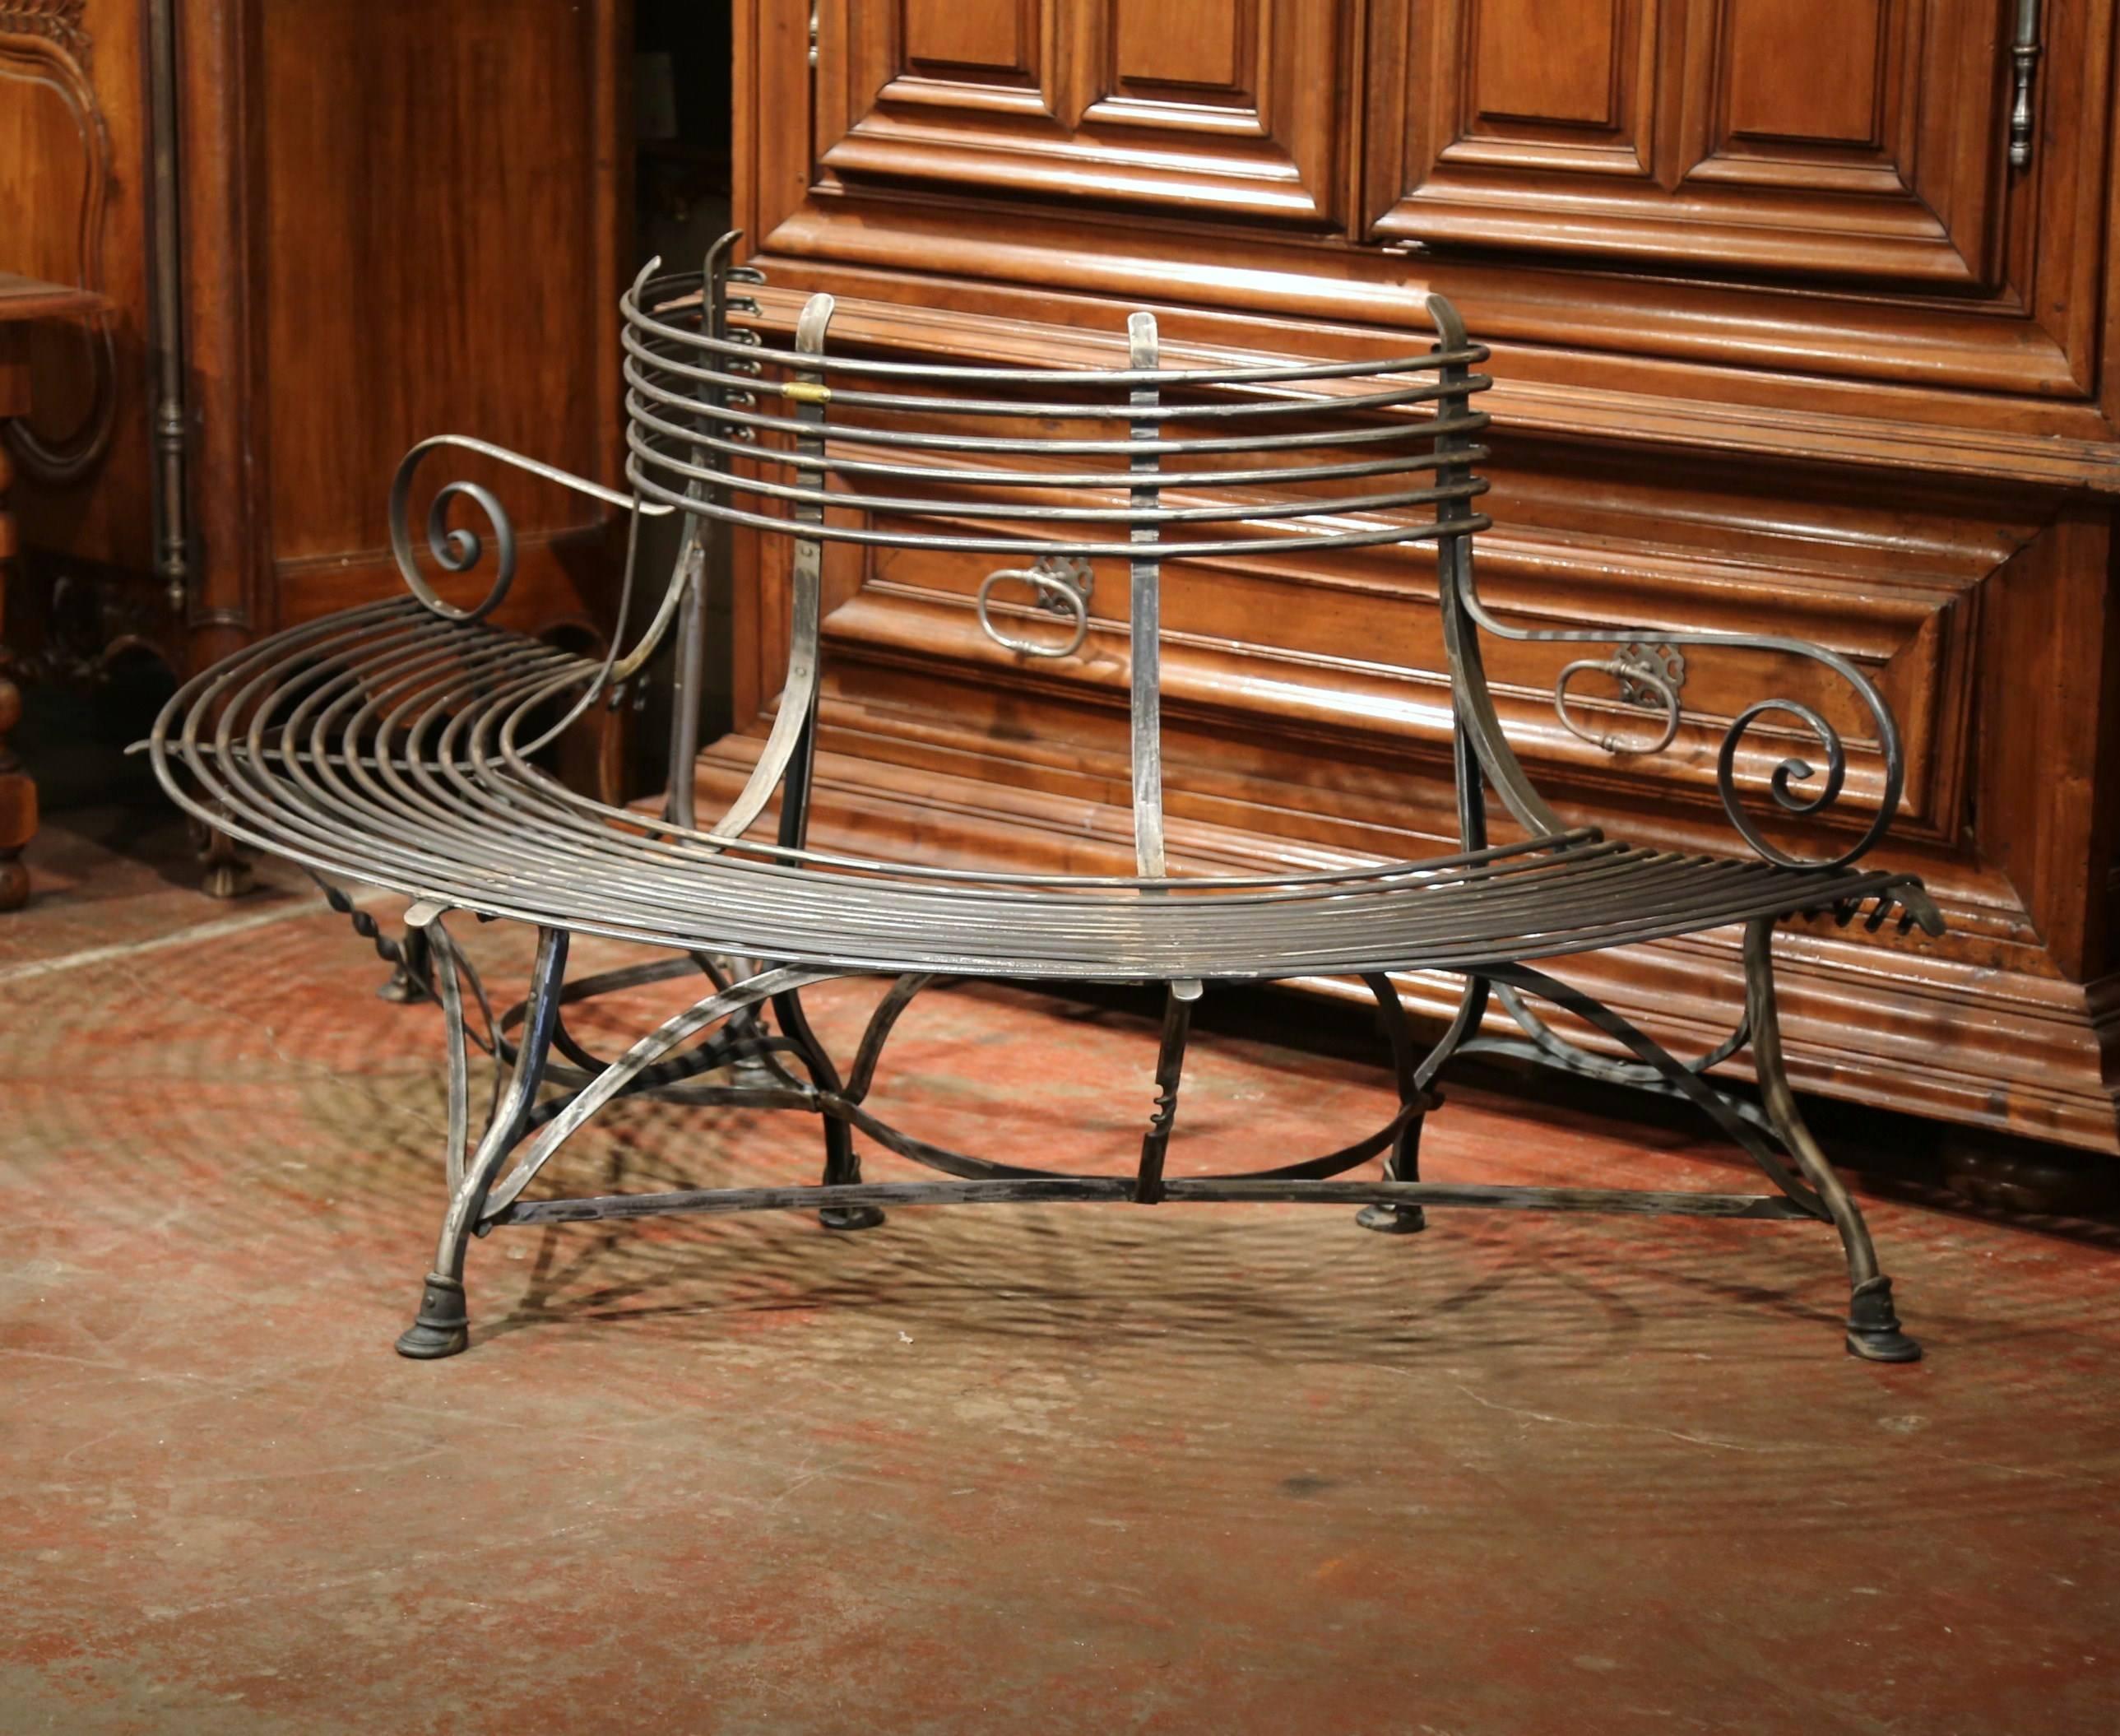 This elegant, curved iron bench was created in France. This durable bench is shaped so that it could wrap around a tree, and has scrolled armrests on both sides and hoof feet at the bottom. The bench has a polished gun barrel finish with a plaque on